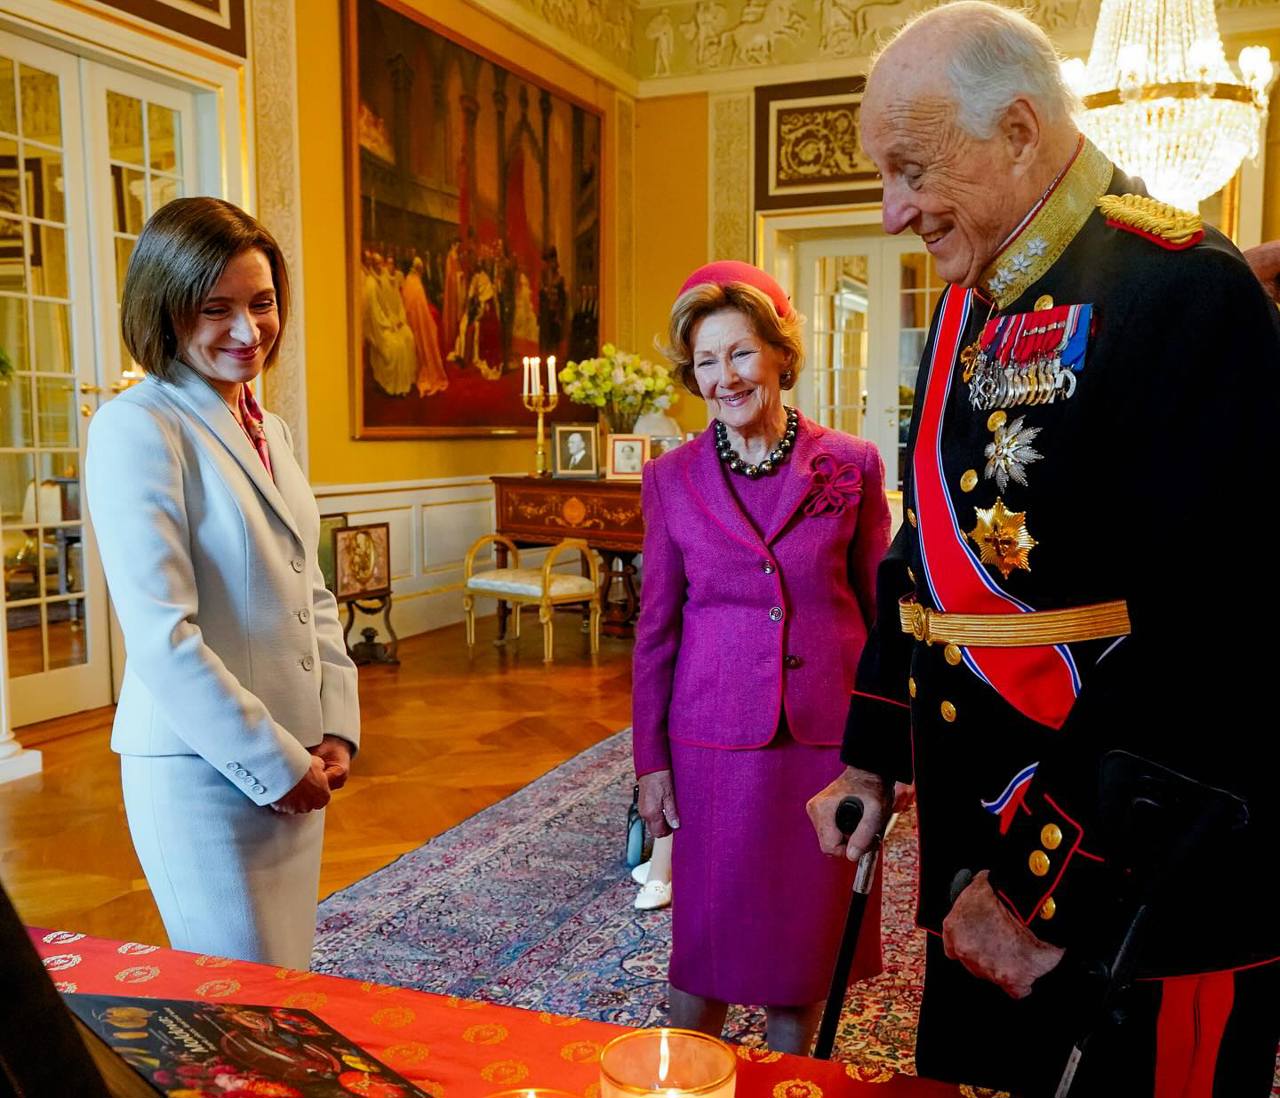 PHOTO // Maia Sandu was welcomes at the Royal Palace in Oslo by Their Majesties - King Harald and Queen Sonja